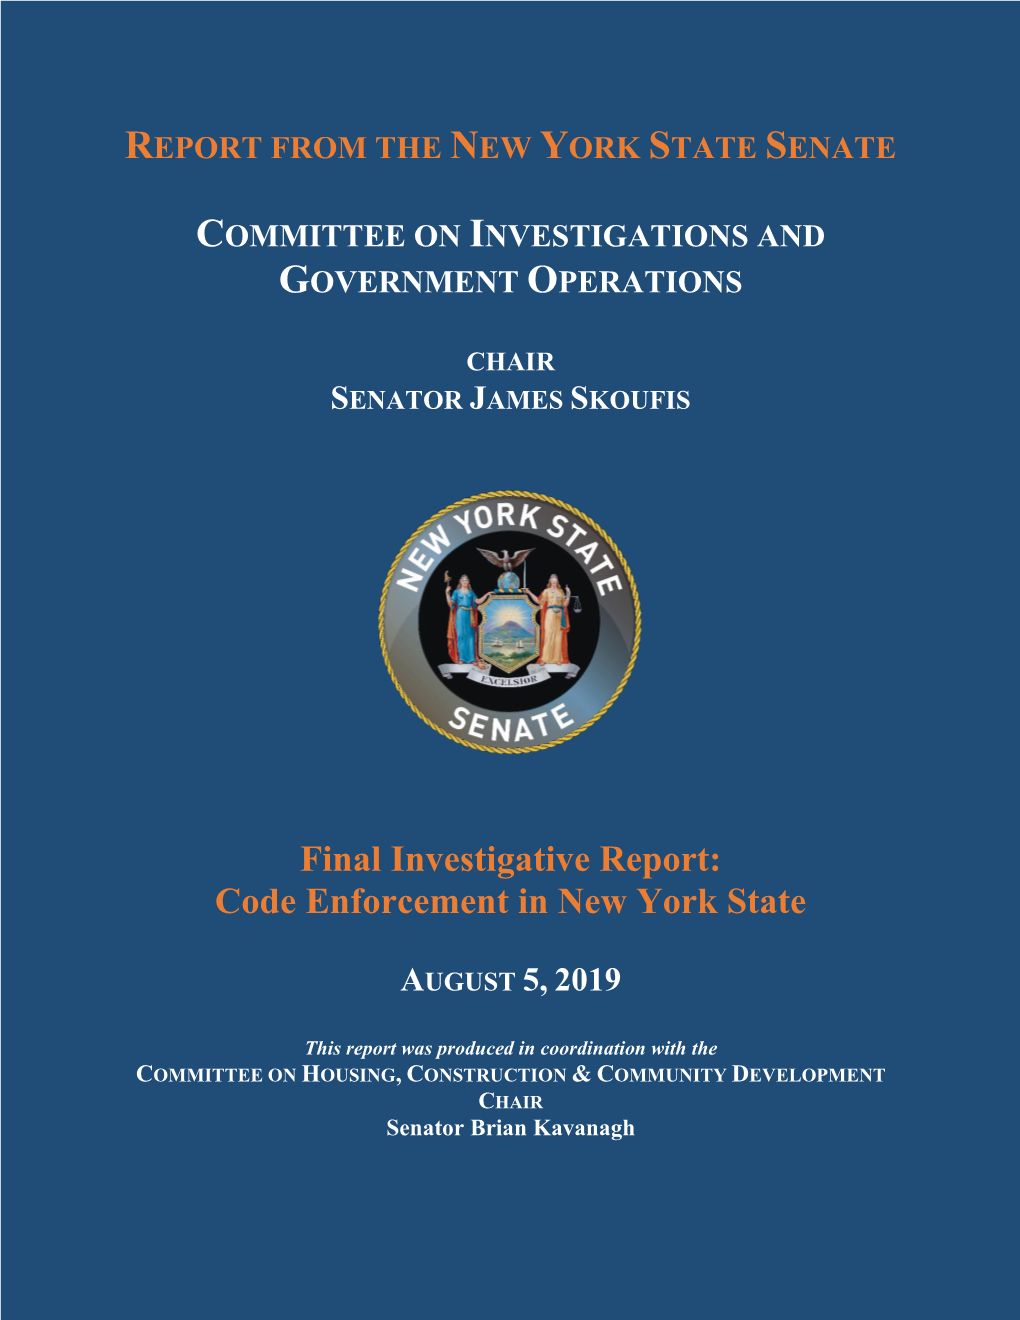 Final Investigative Report: Code Enforcement in New York State